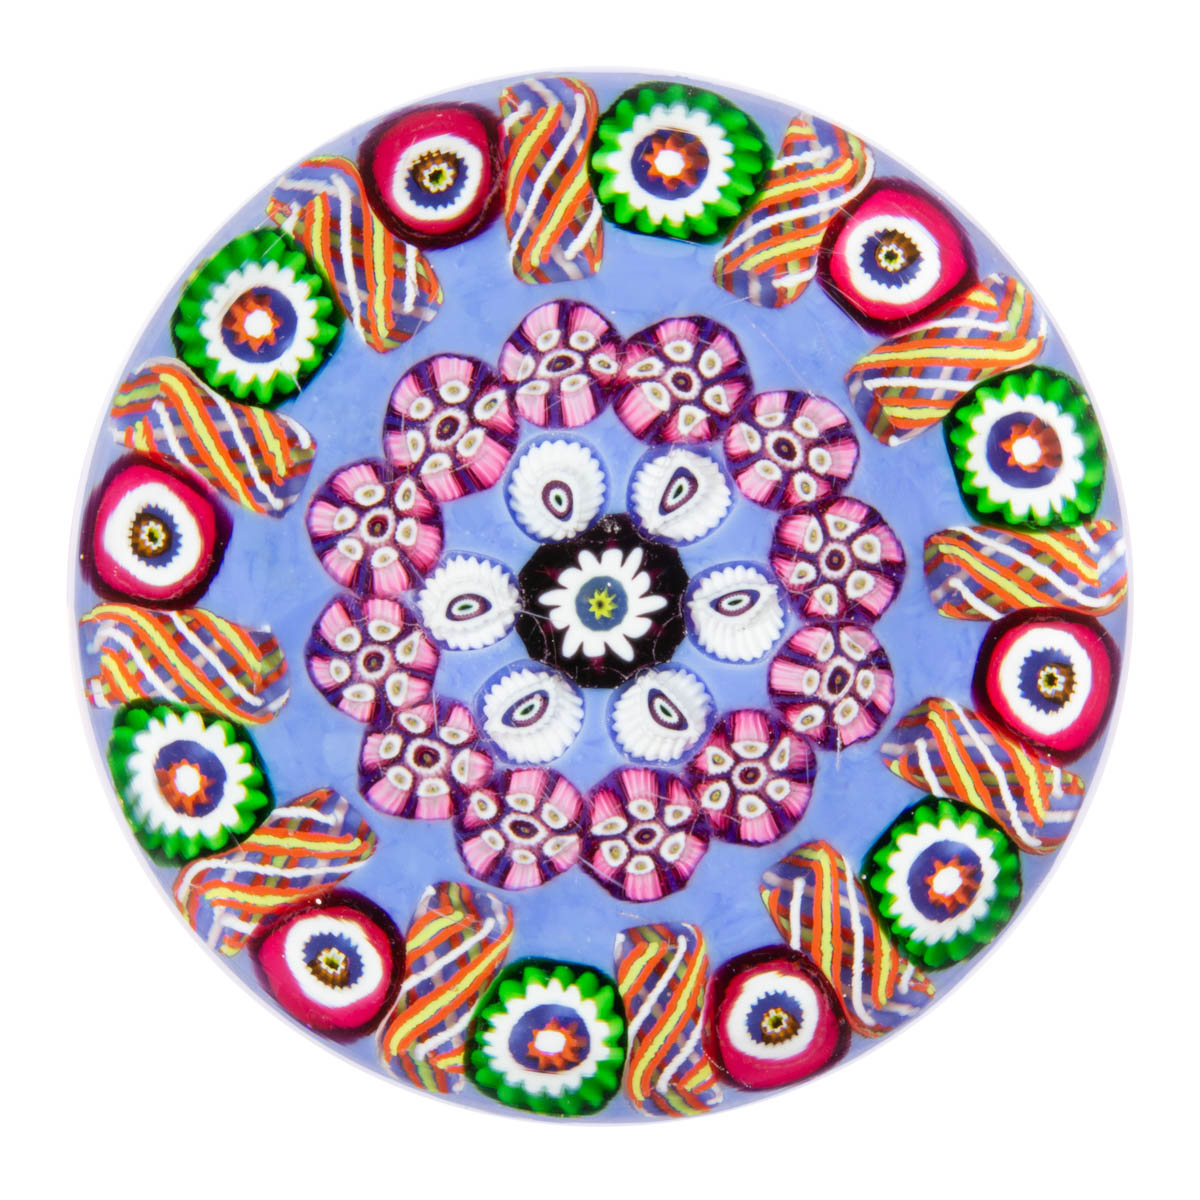 EARLY PAUL YSART (SCOTTISH, 1904-1979) ATTRIBUTED CONCENTRIC MILLEFIORI ART GLASS PAPERWEIGHT